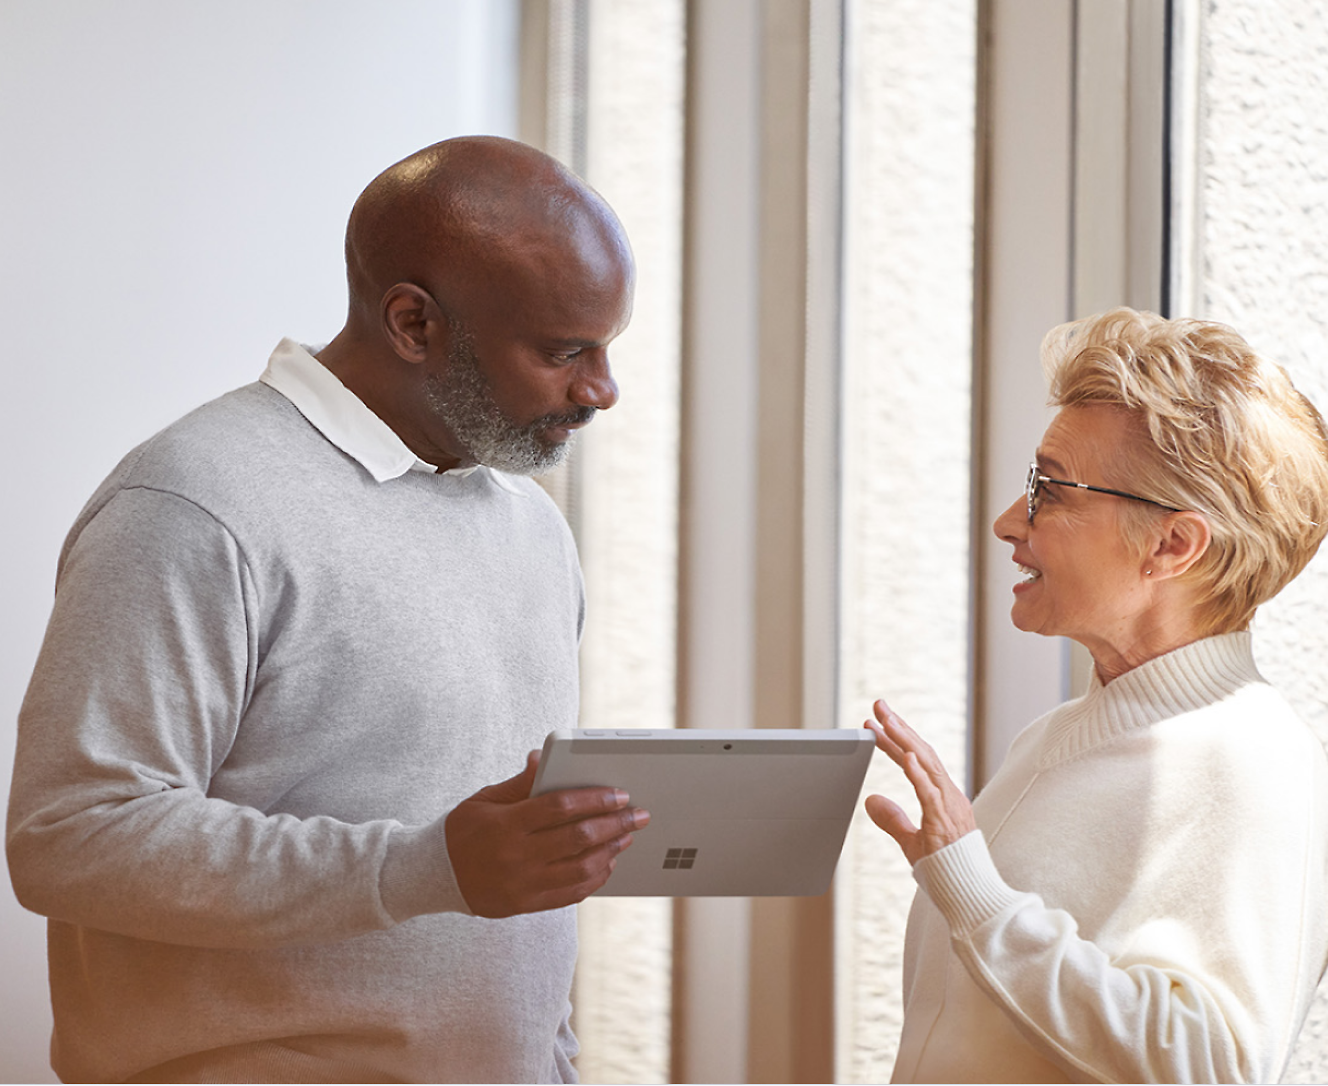 A man holding a surface pro talking to a woman